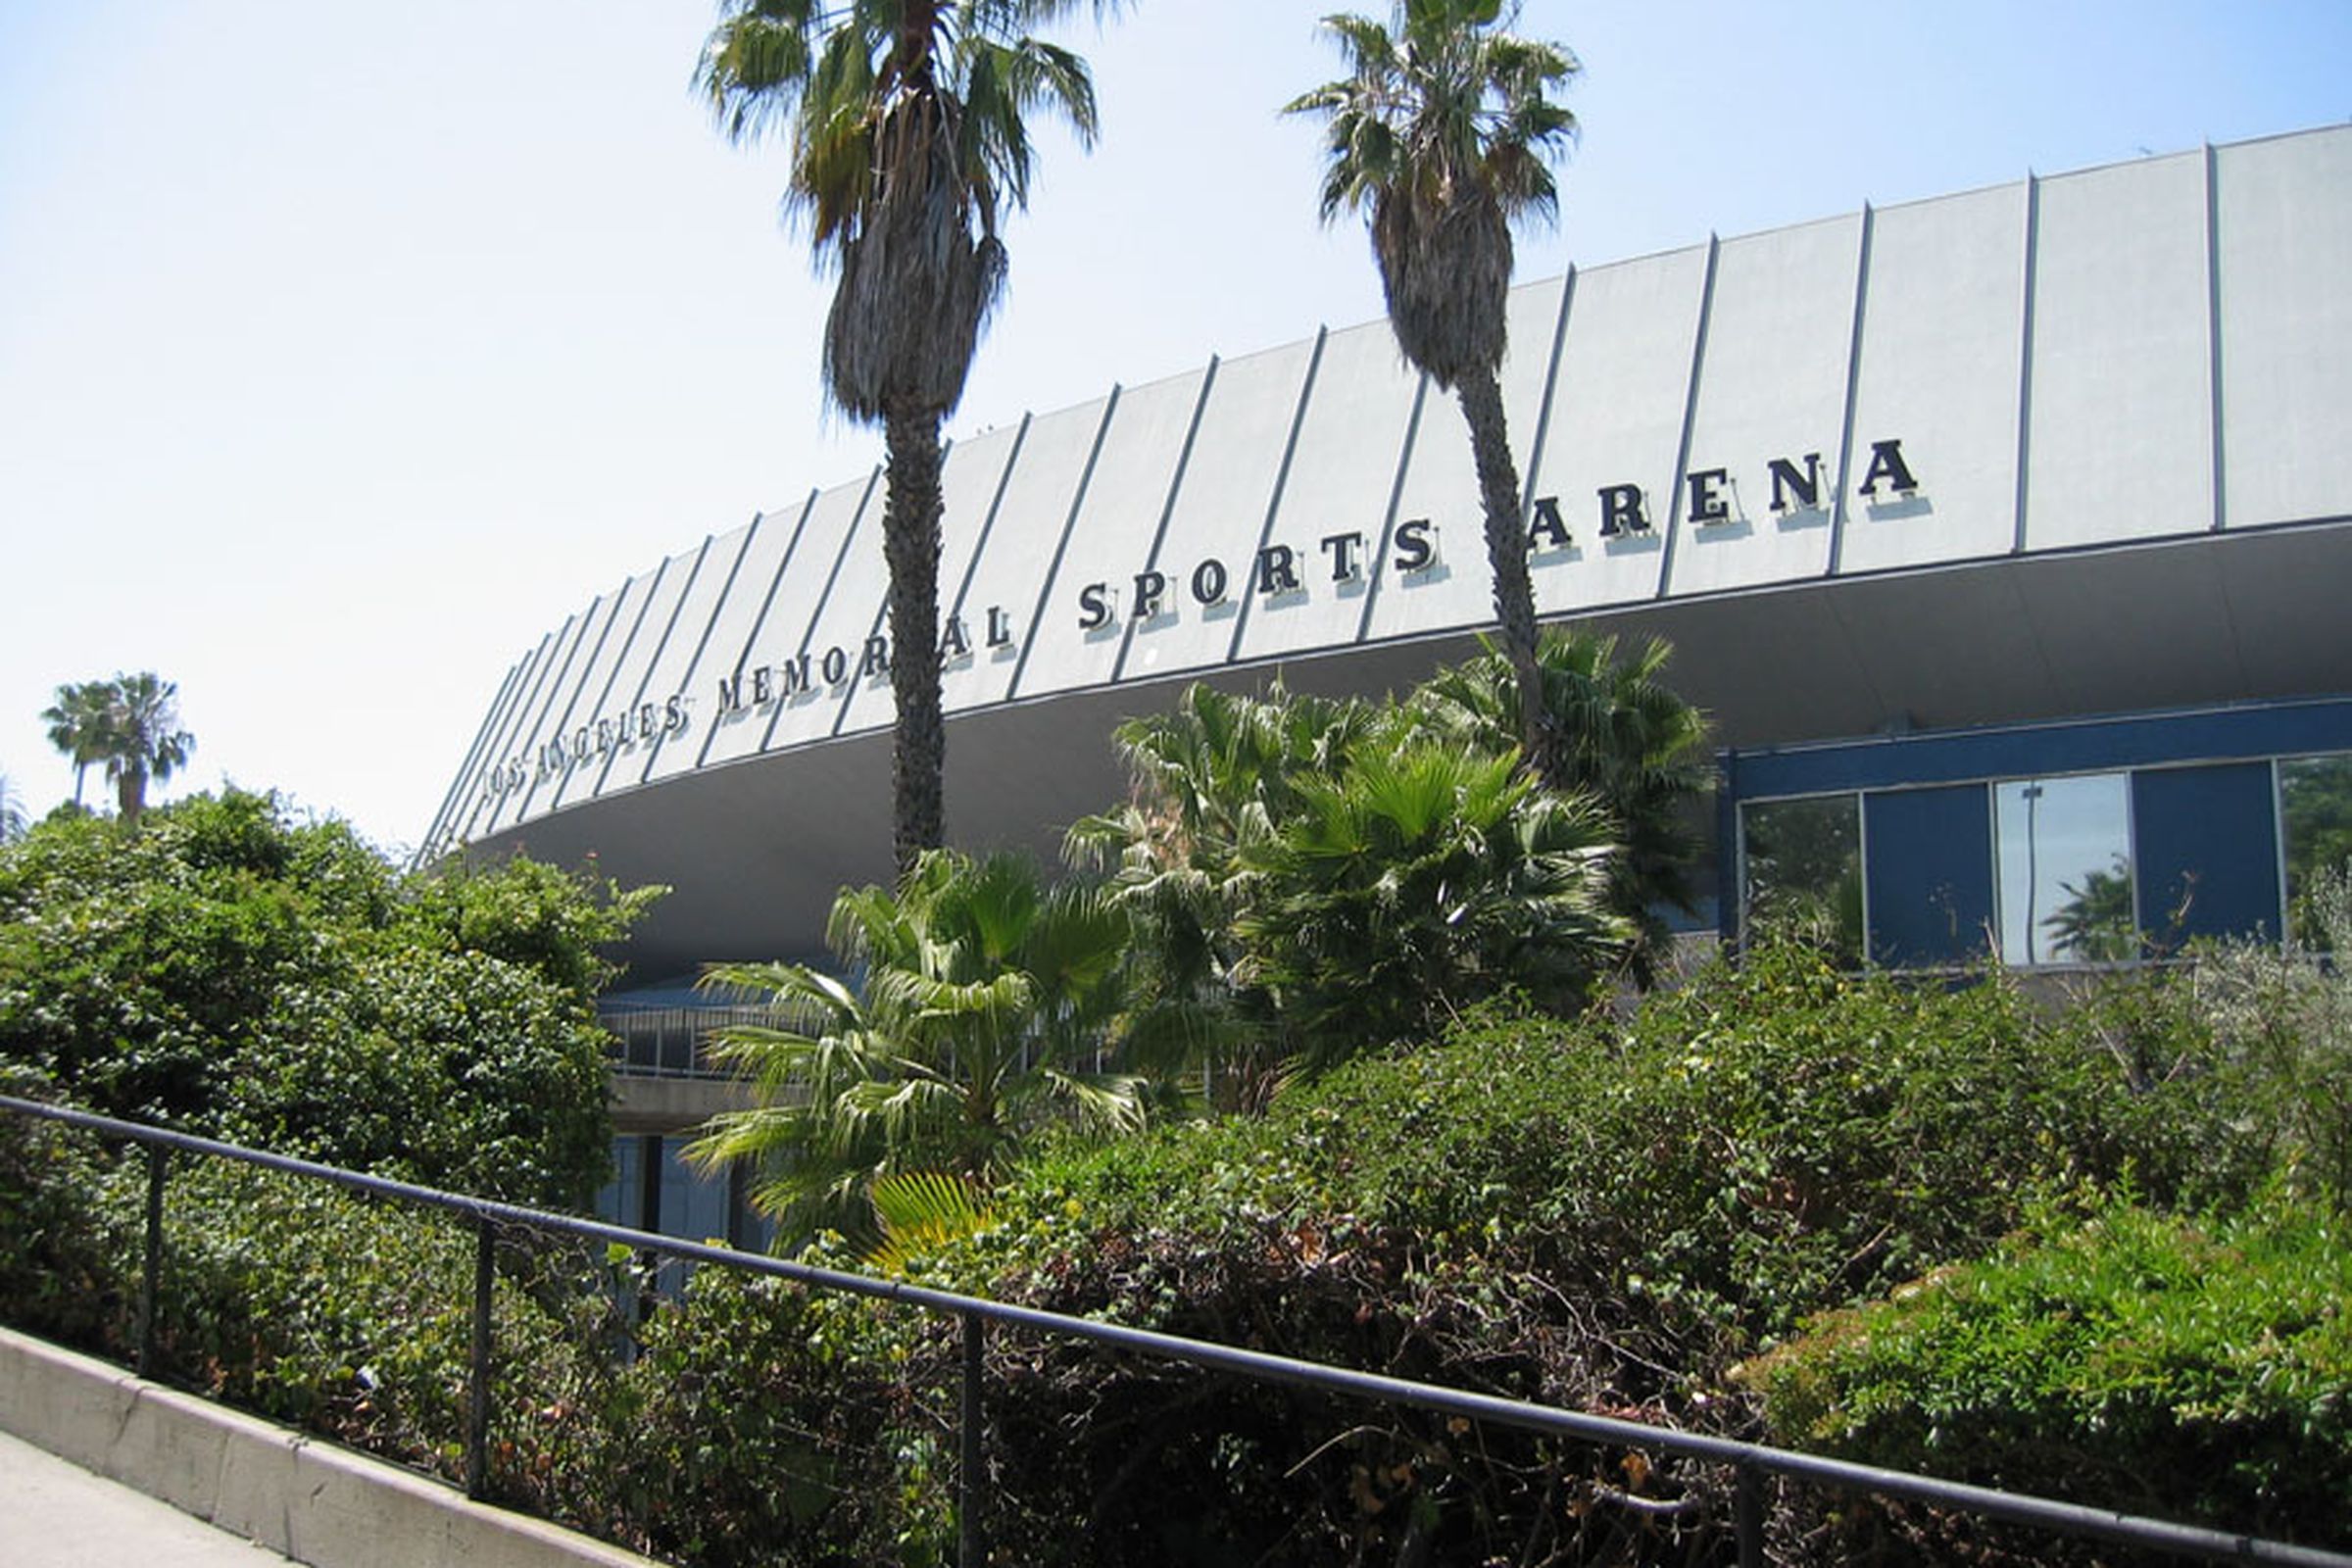 Los Angeles Memorial Sports Arena (from Wikipedia)